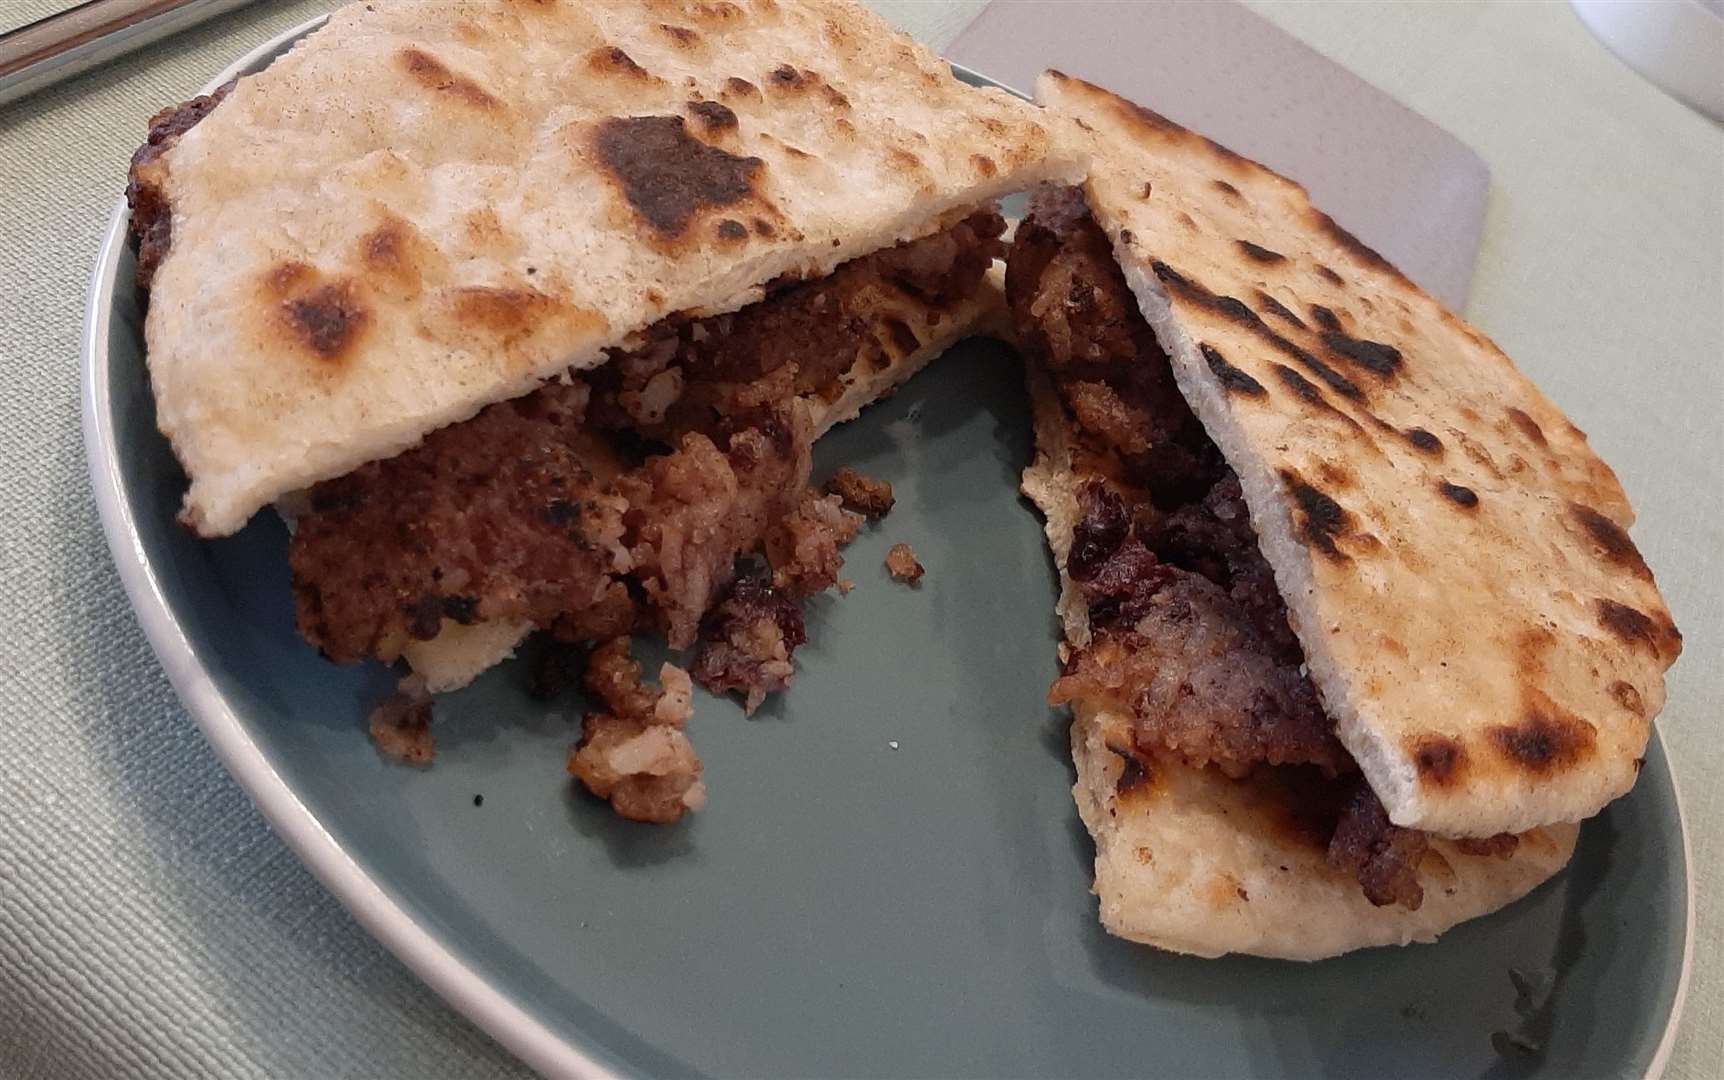 Tofu, rice and kidney bean 'burgers' in flatbread. They quickly became a crumbling mess